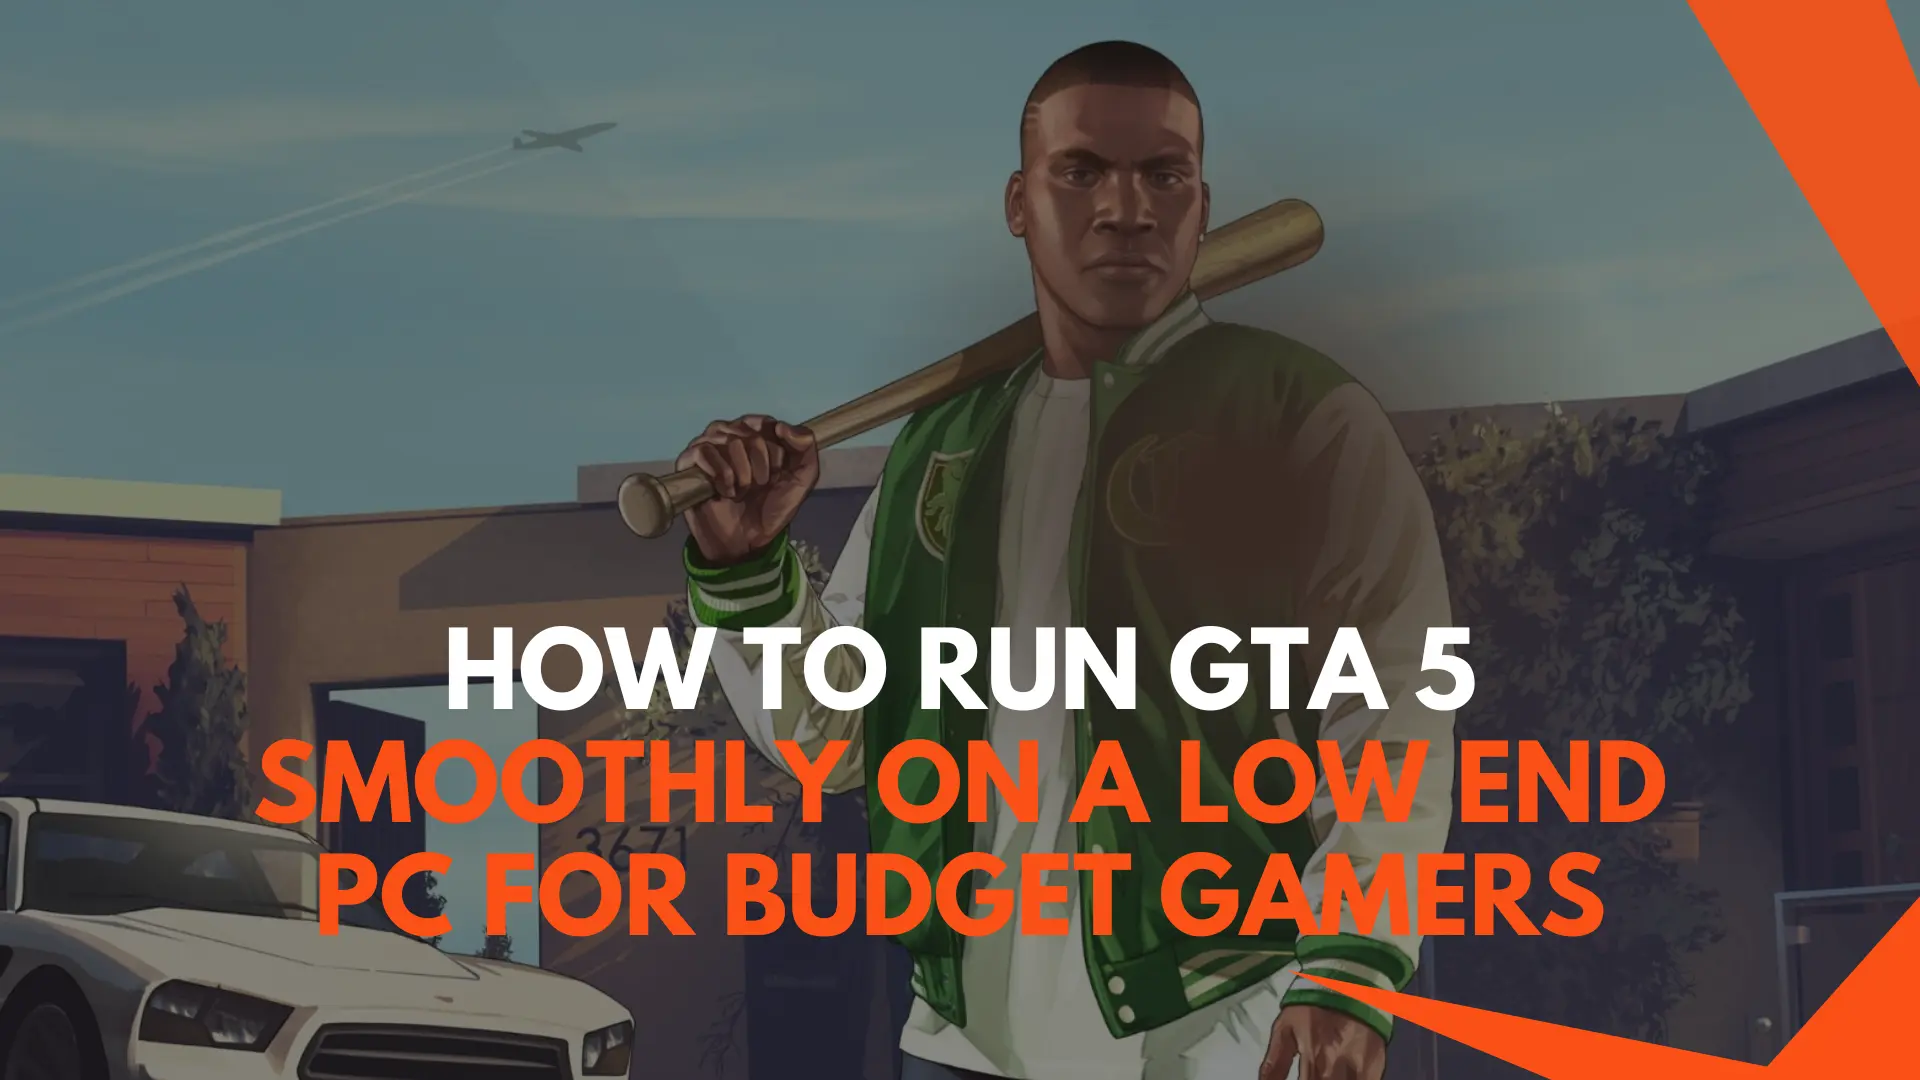 How to Run GTA 5 Smoothly on a Low-End PC for Budget Gamers